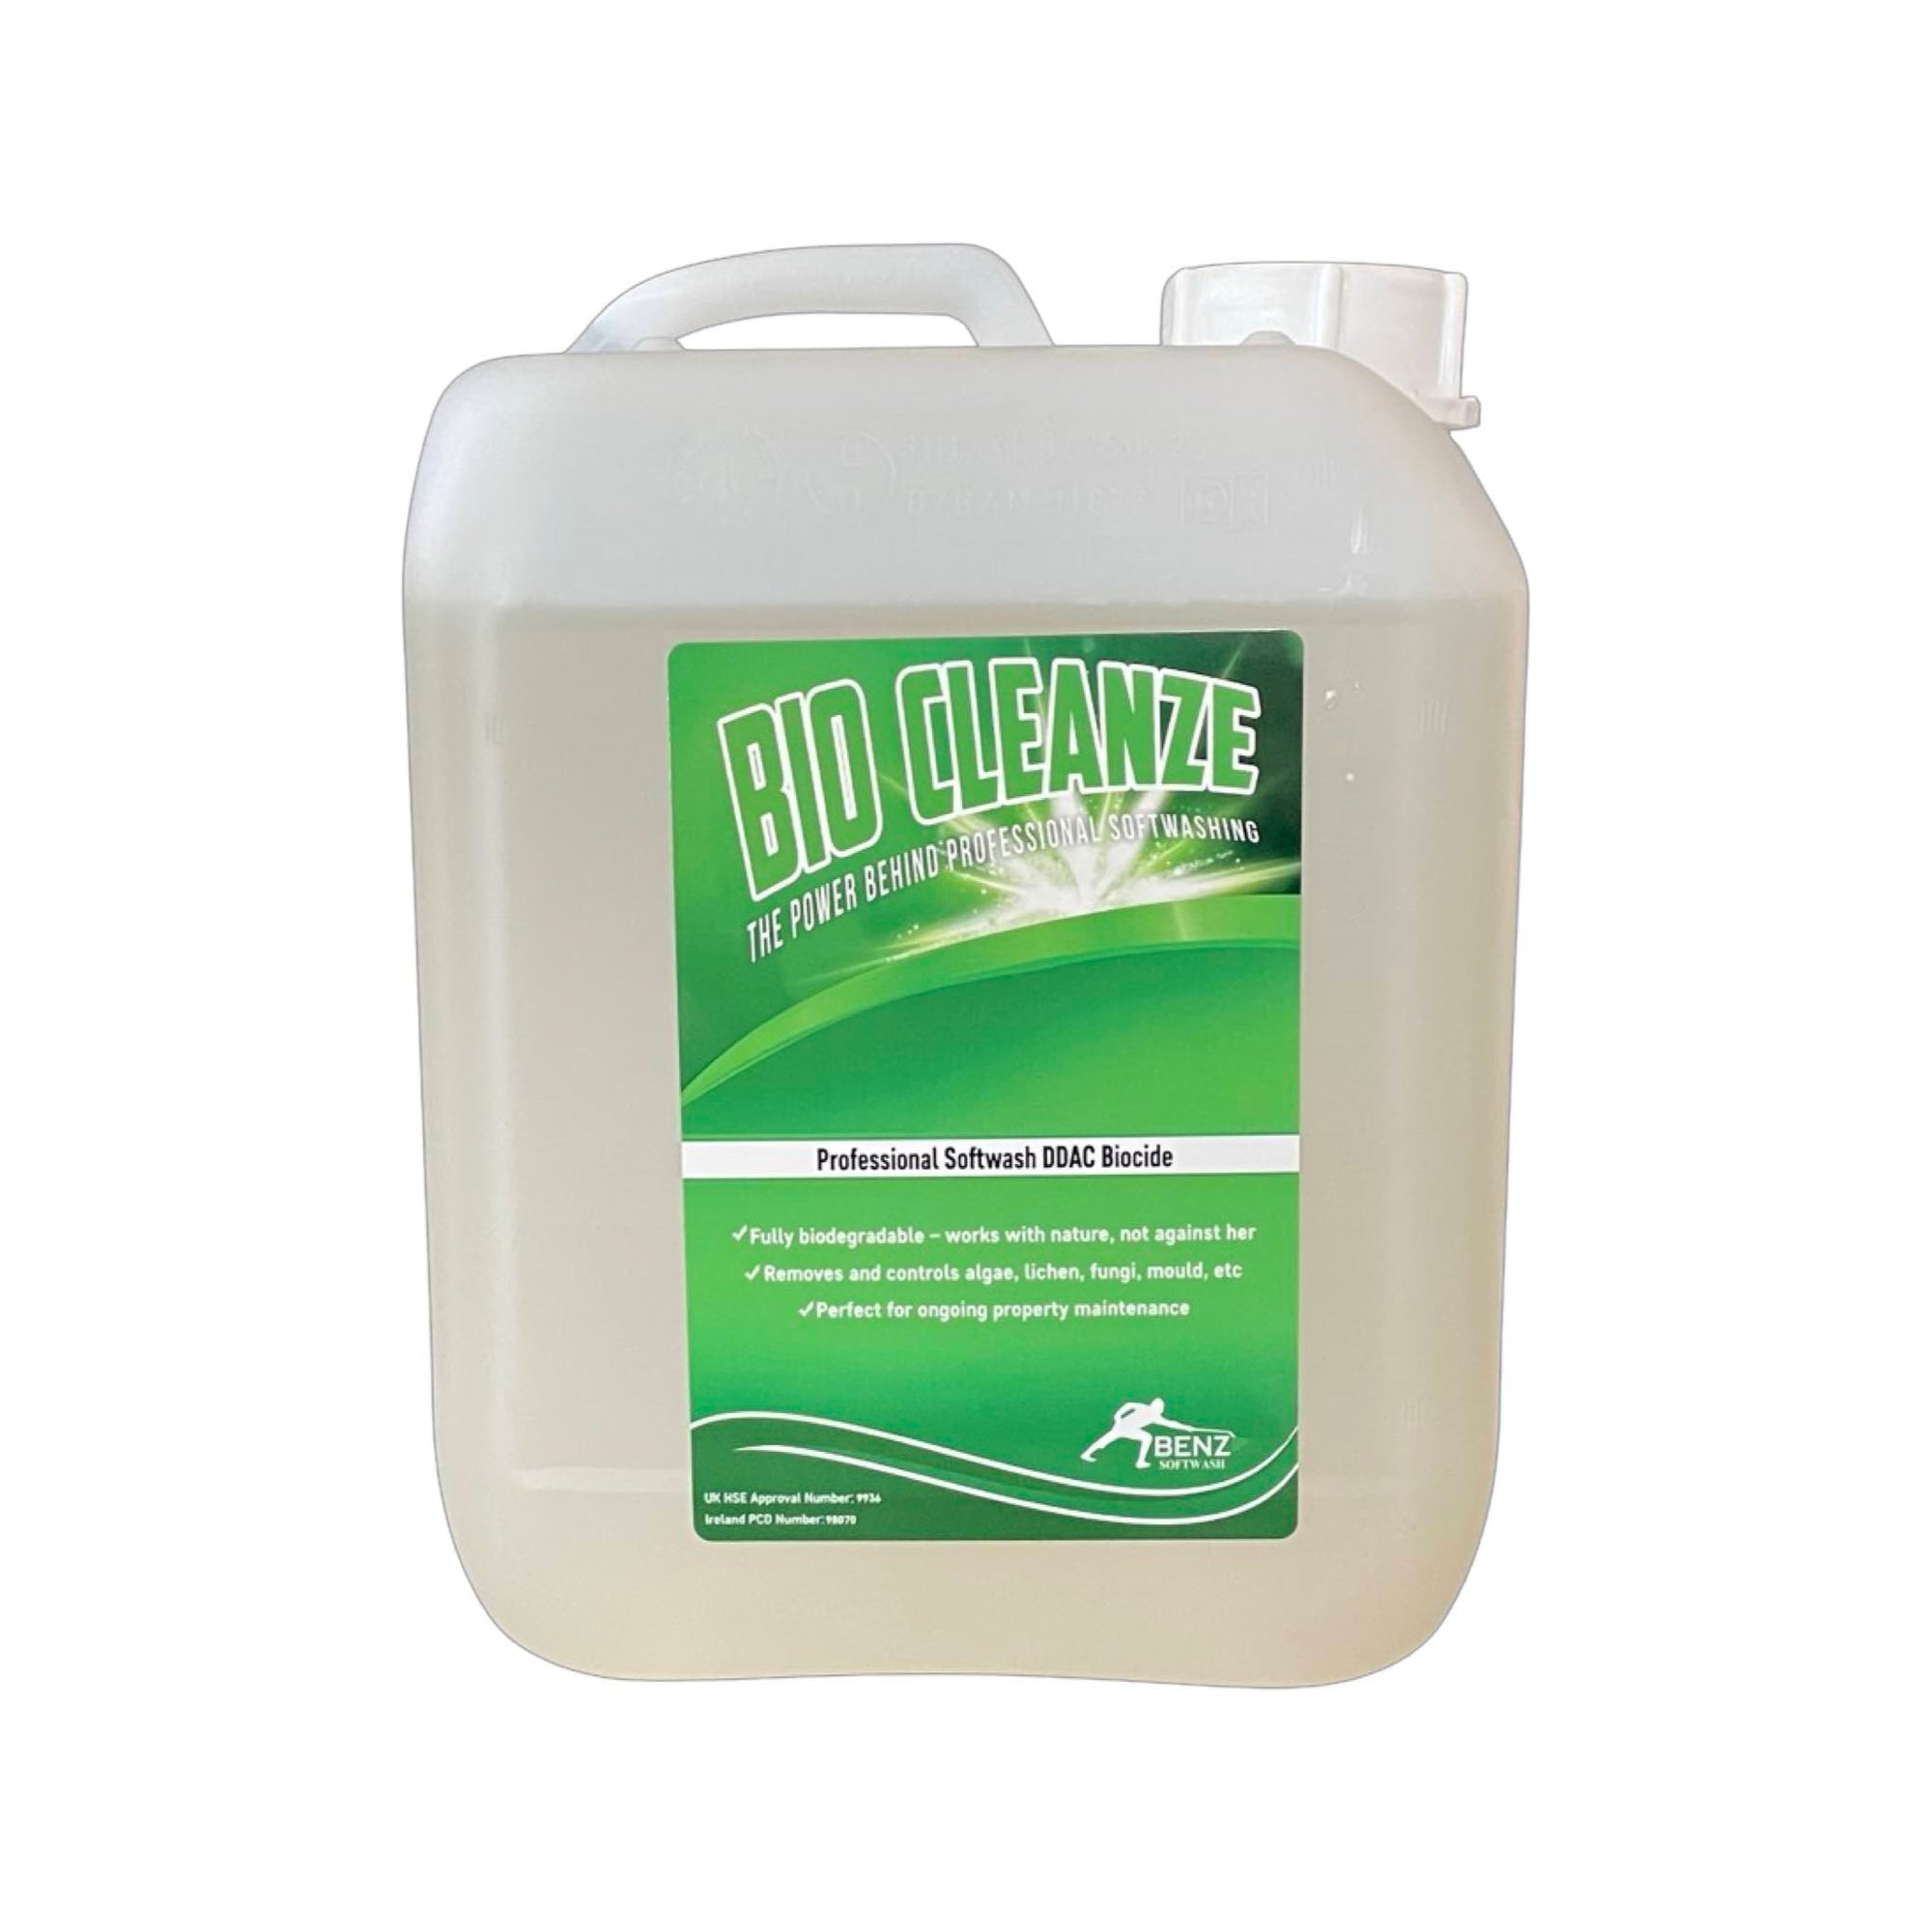 BIO CLEANZE – 50% ddac softwash biocide: Treats the biofilm on roofs, render, walls, patios, paths & naturally deep cleans over time.